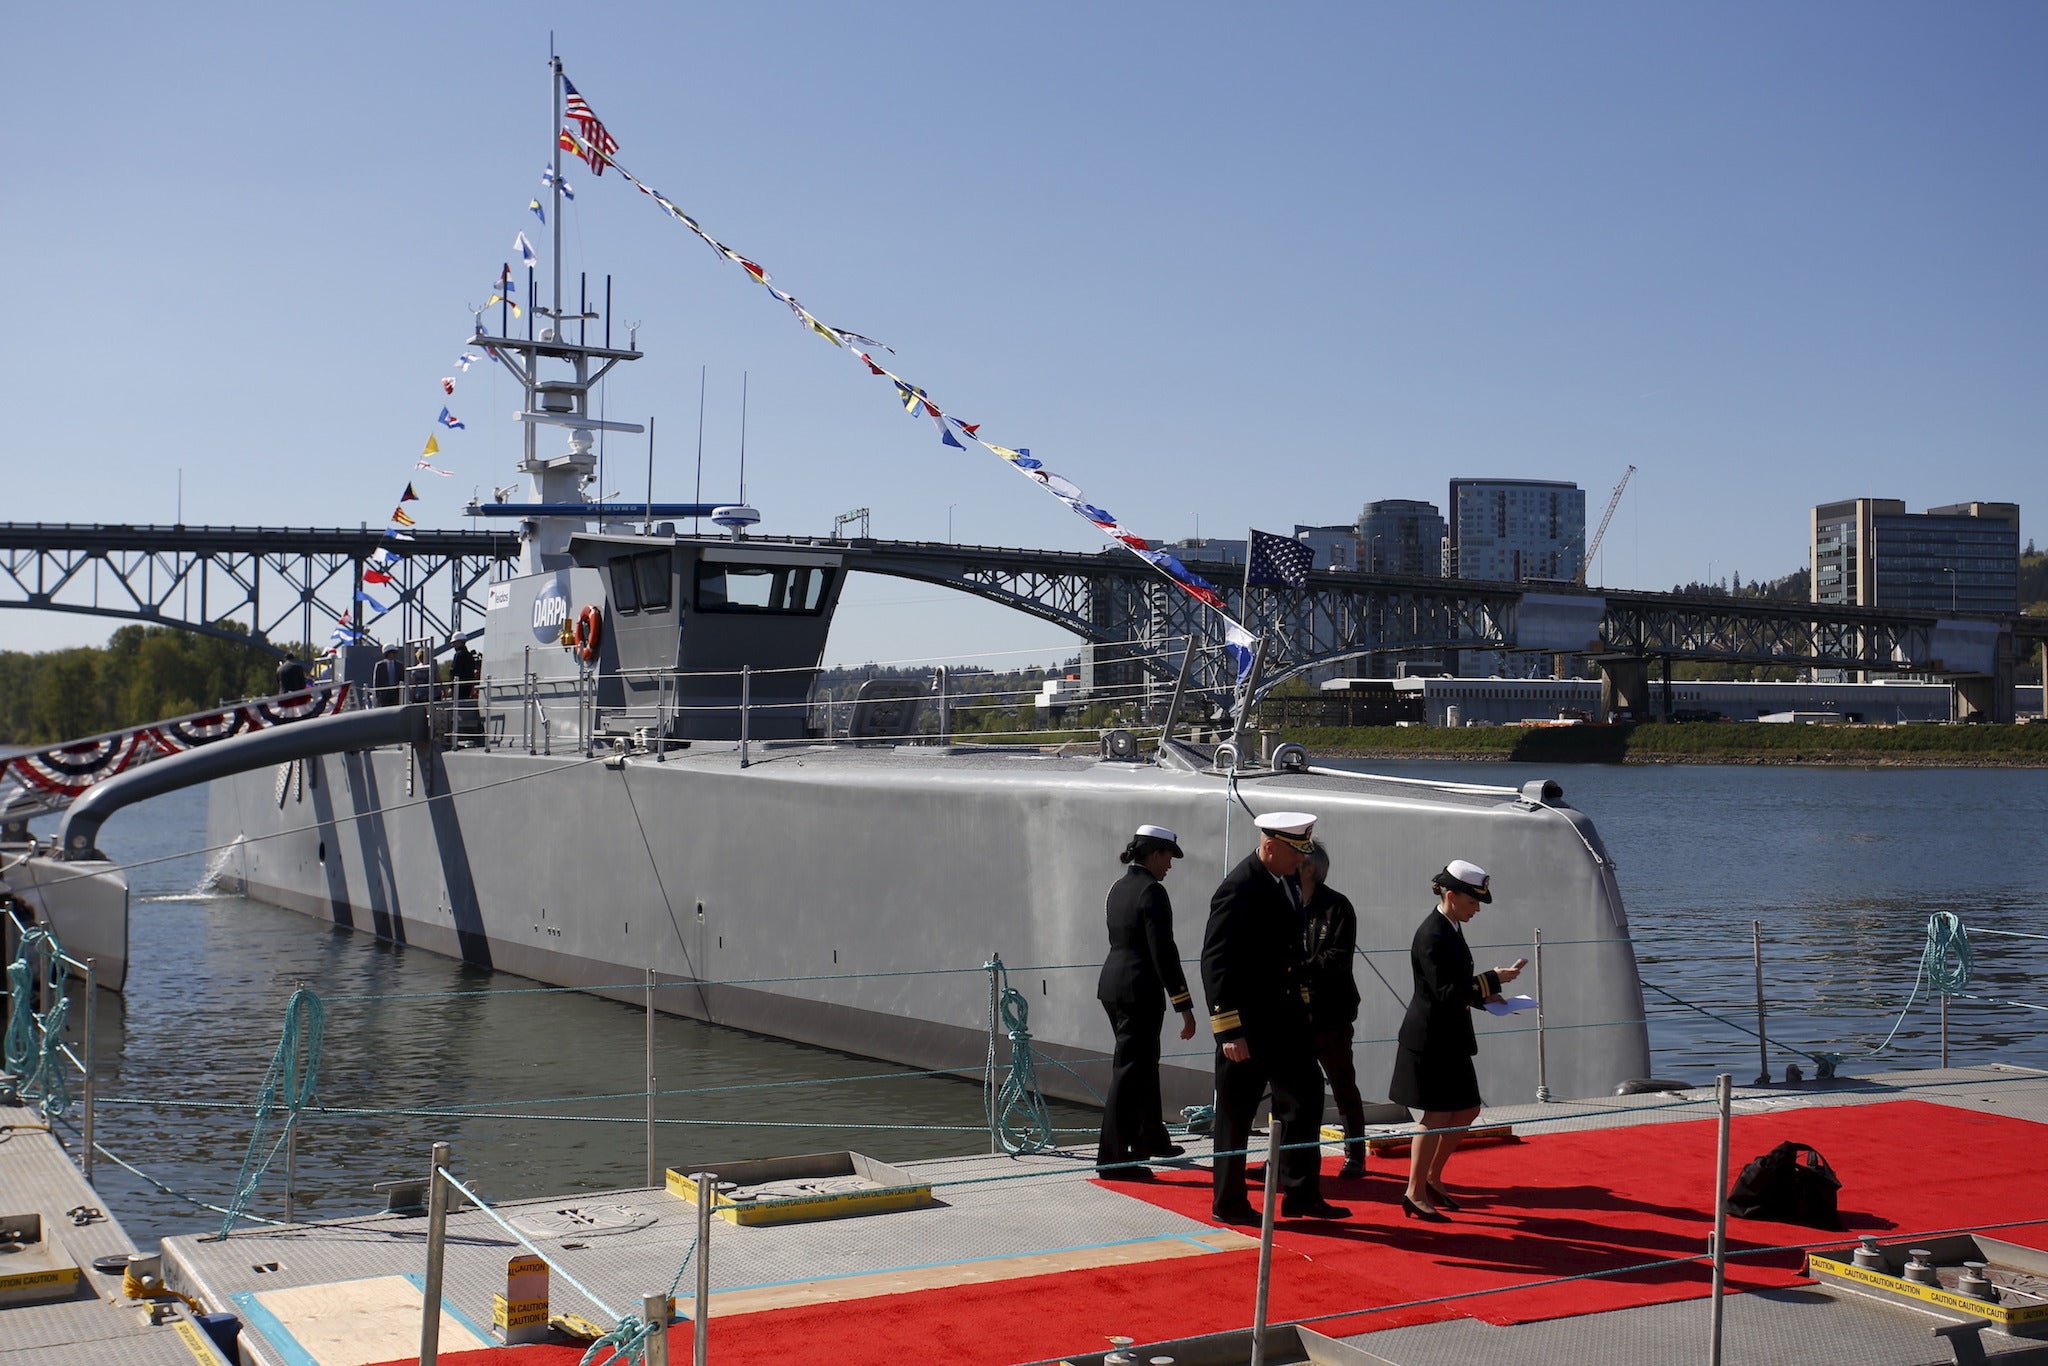 The autonomous ship "Sea Hunter", developed by DARPA, is shown dockedn after its christening ceremony in Portland, Oregon, April 7, 2016